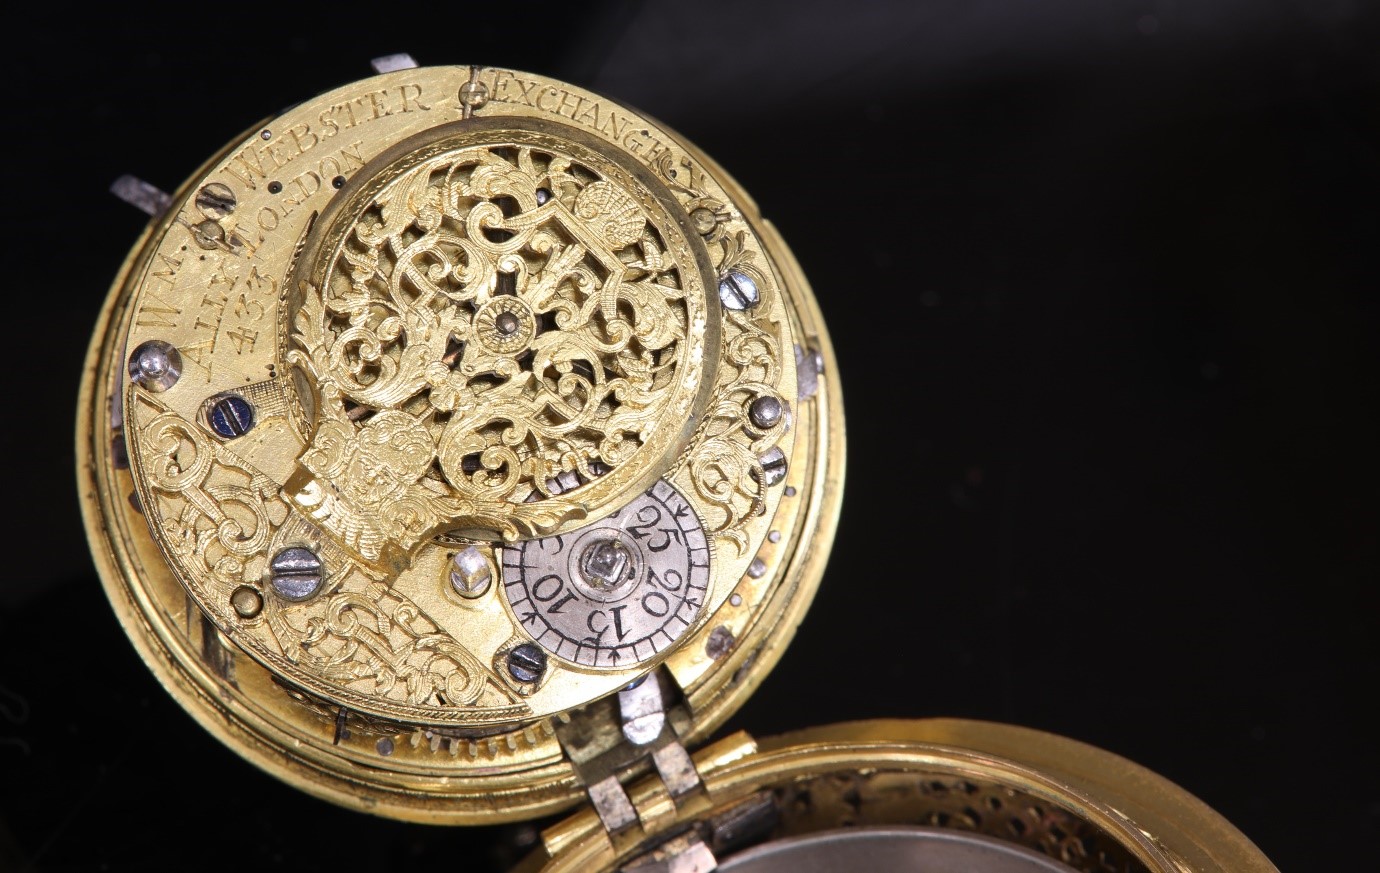 Image of detail of watch by William Webster